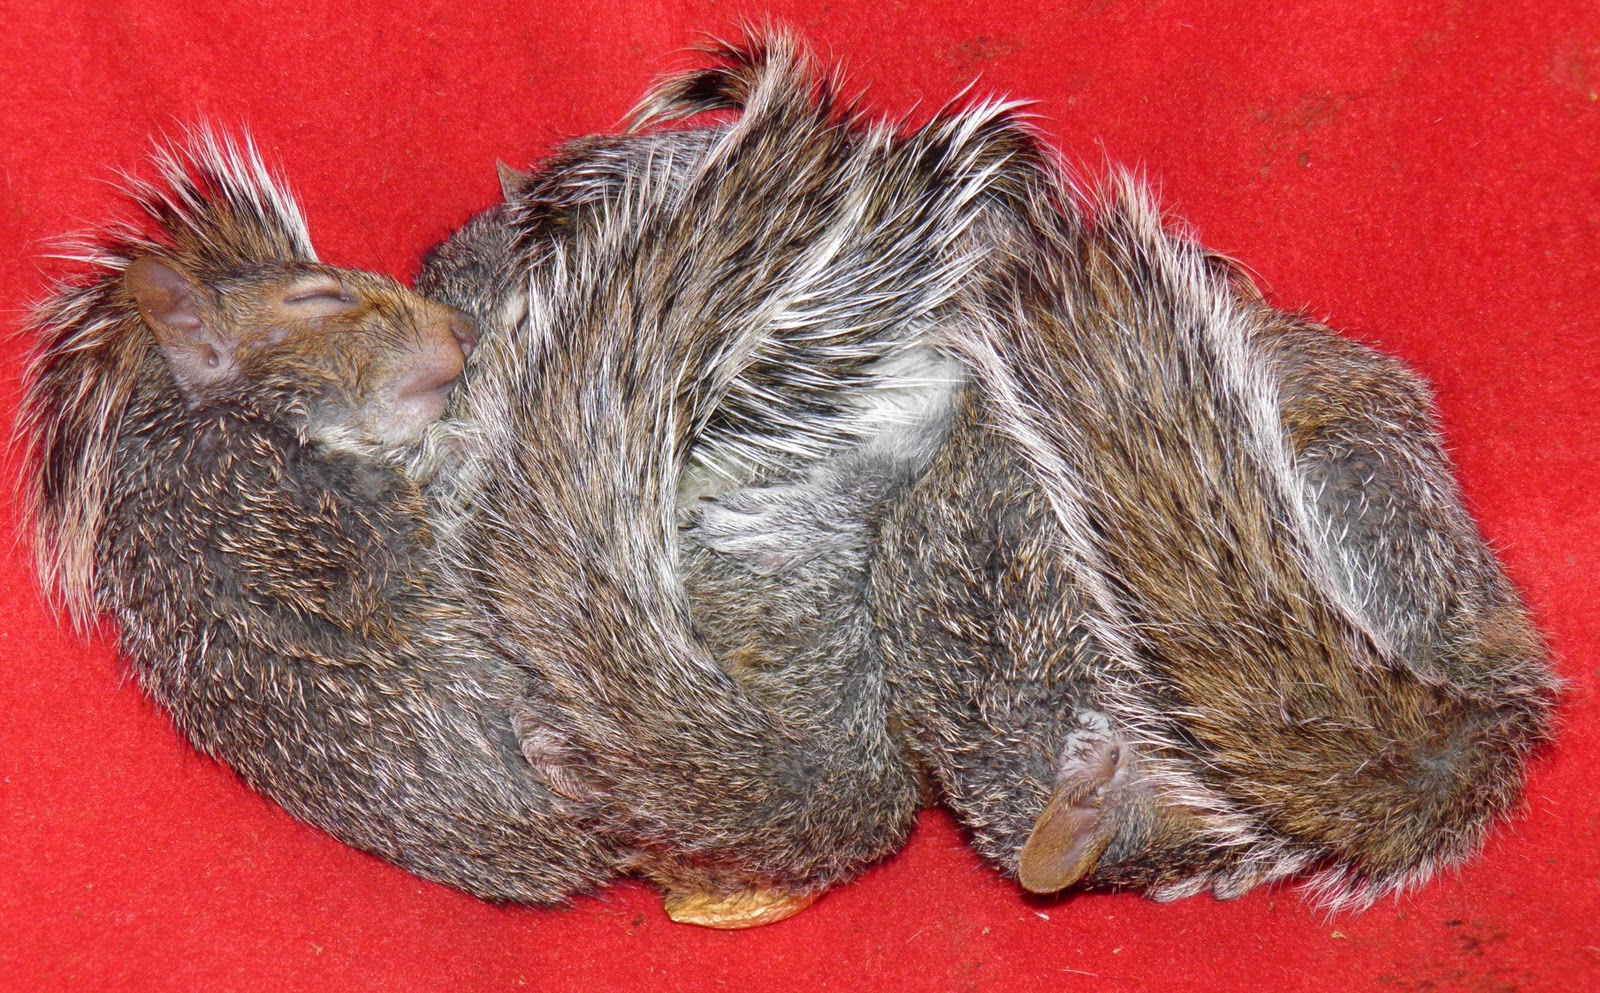 How Many Baby Squirrels in This Adorable Pile?  AnimalTourism News